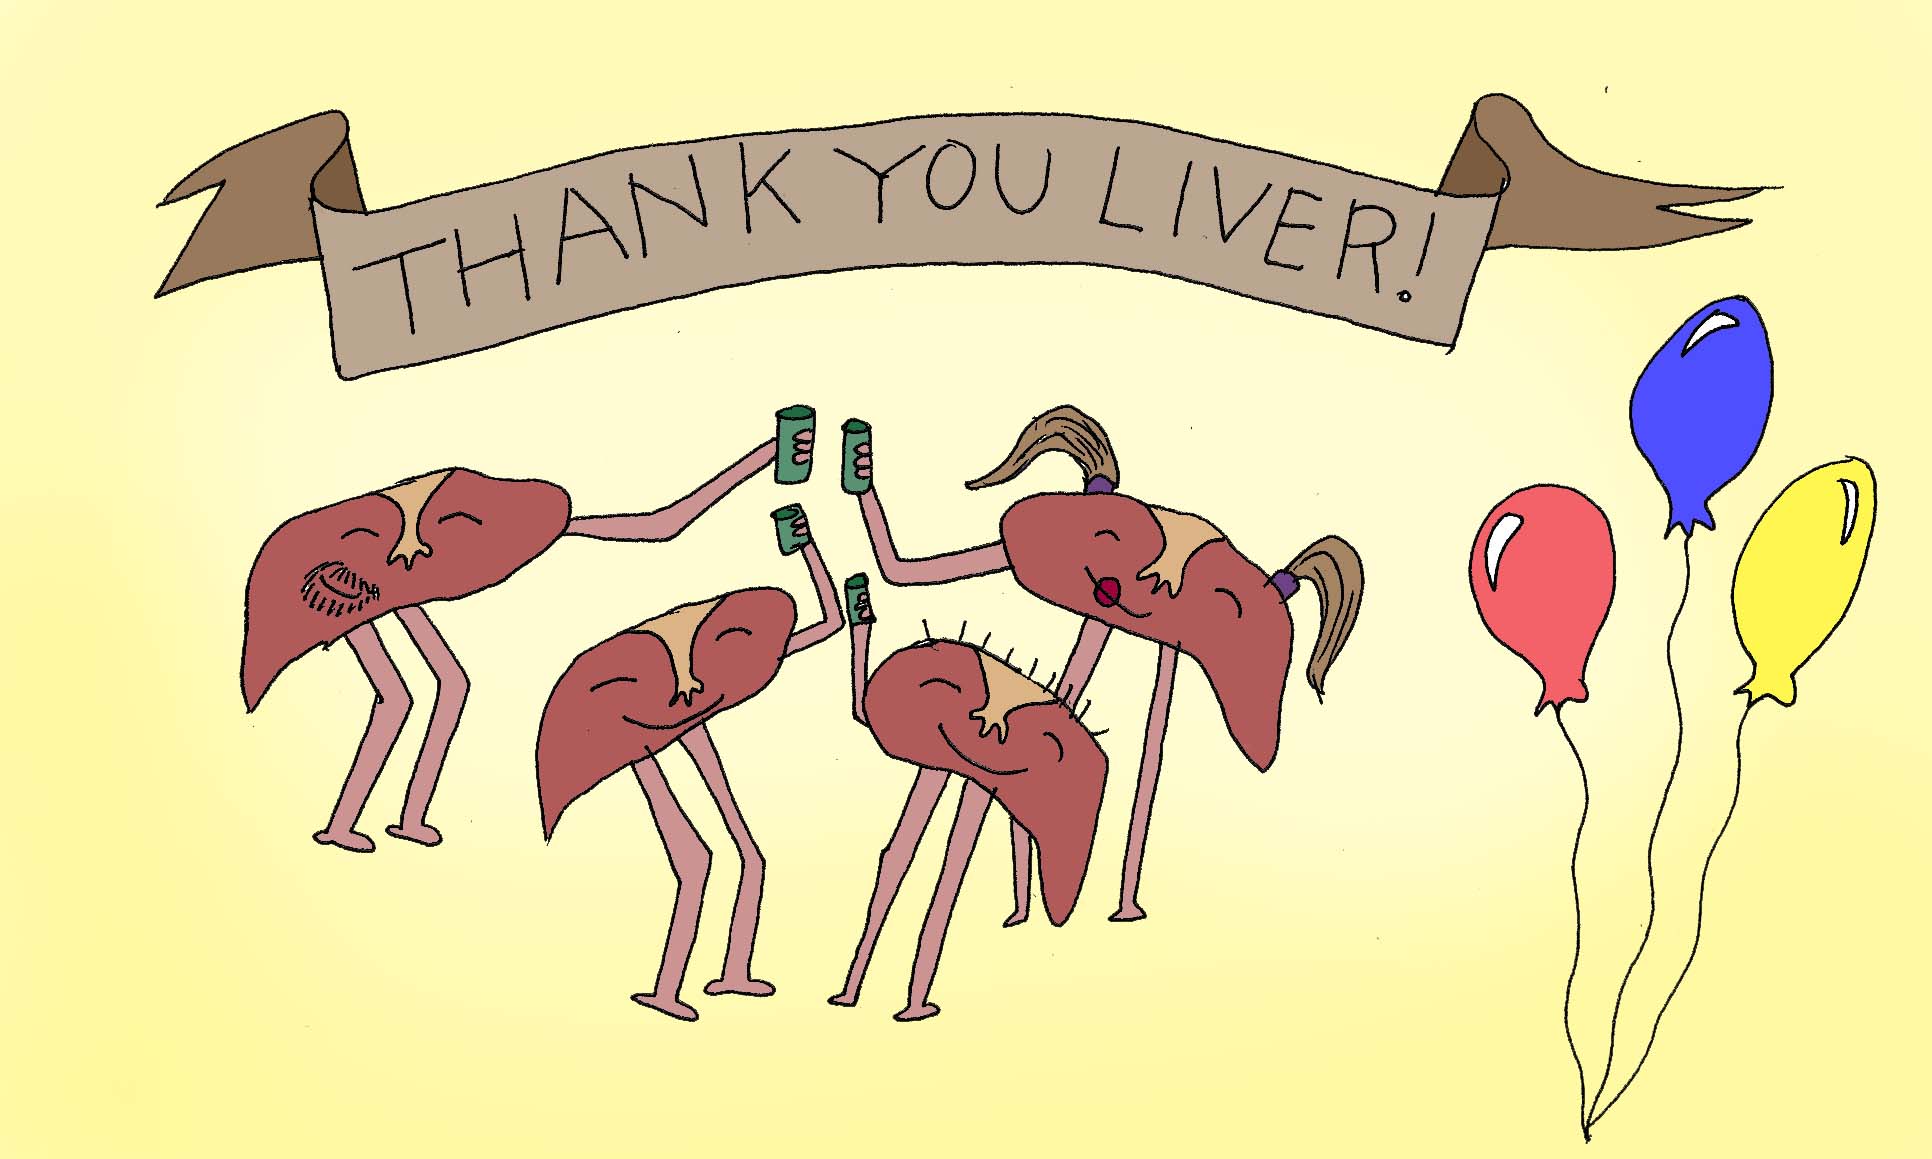 Liver Partytime!